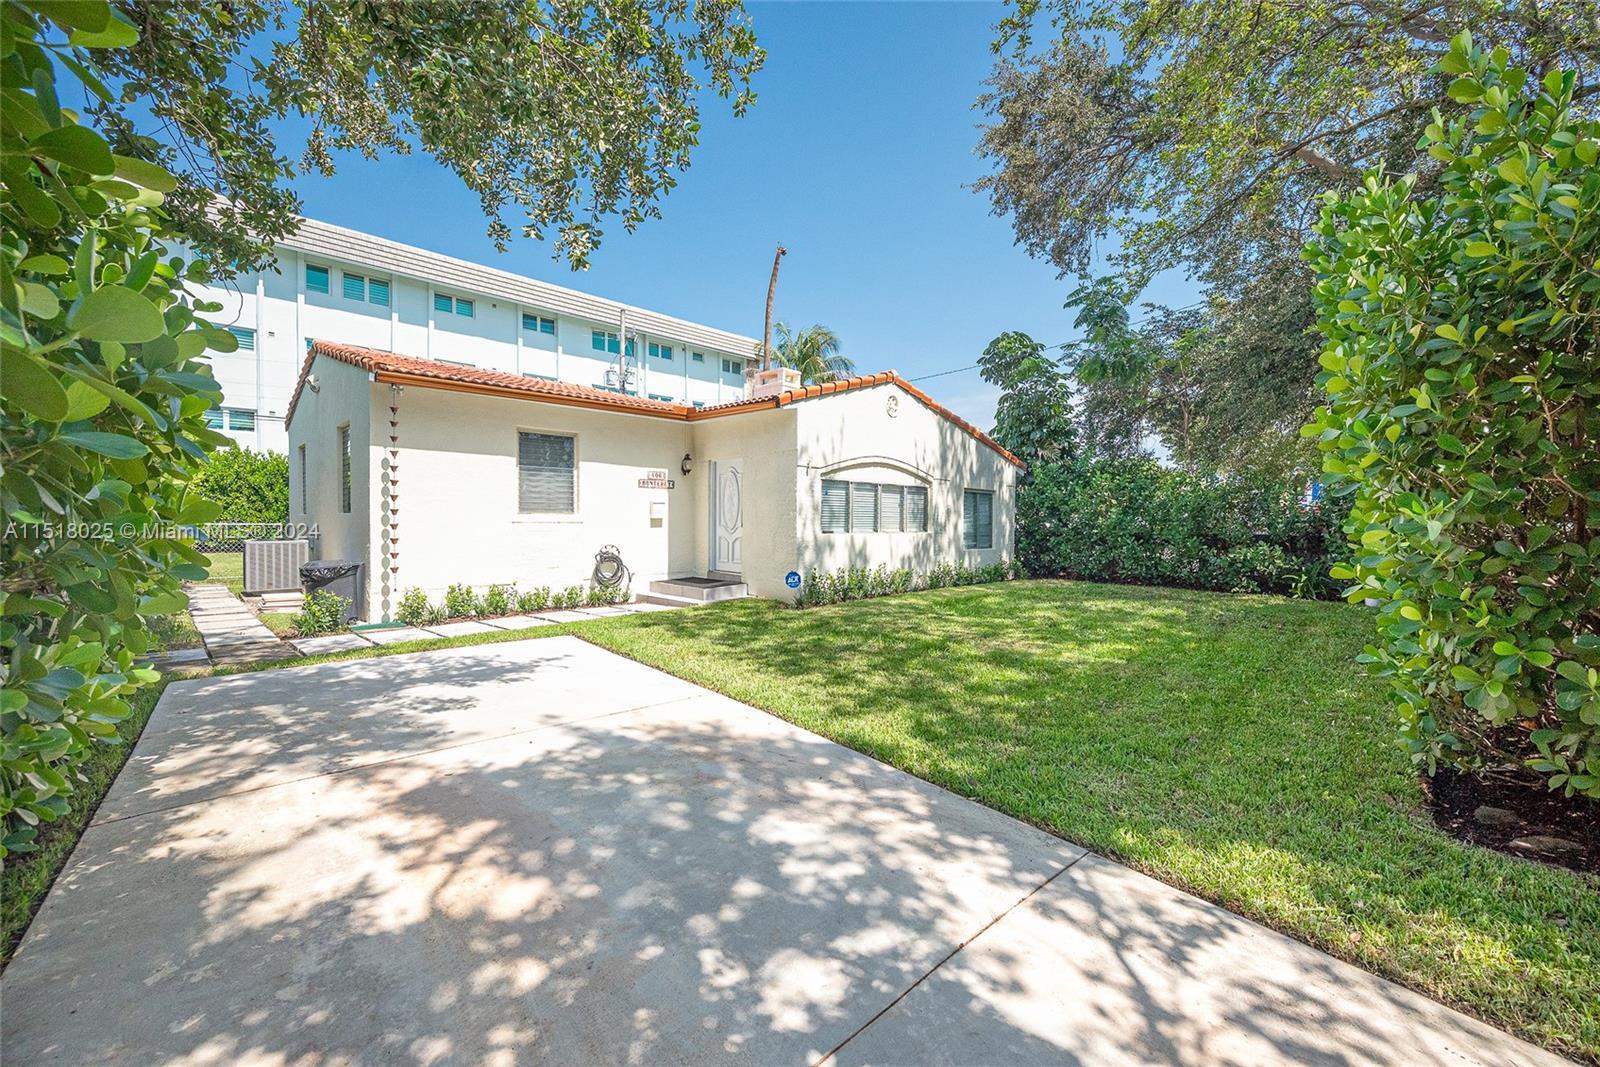 Photo of 806 Monterey St in Coral Gables, FL